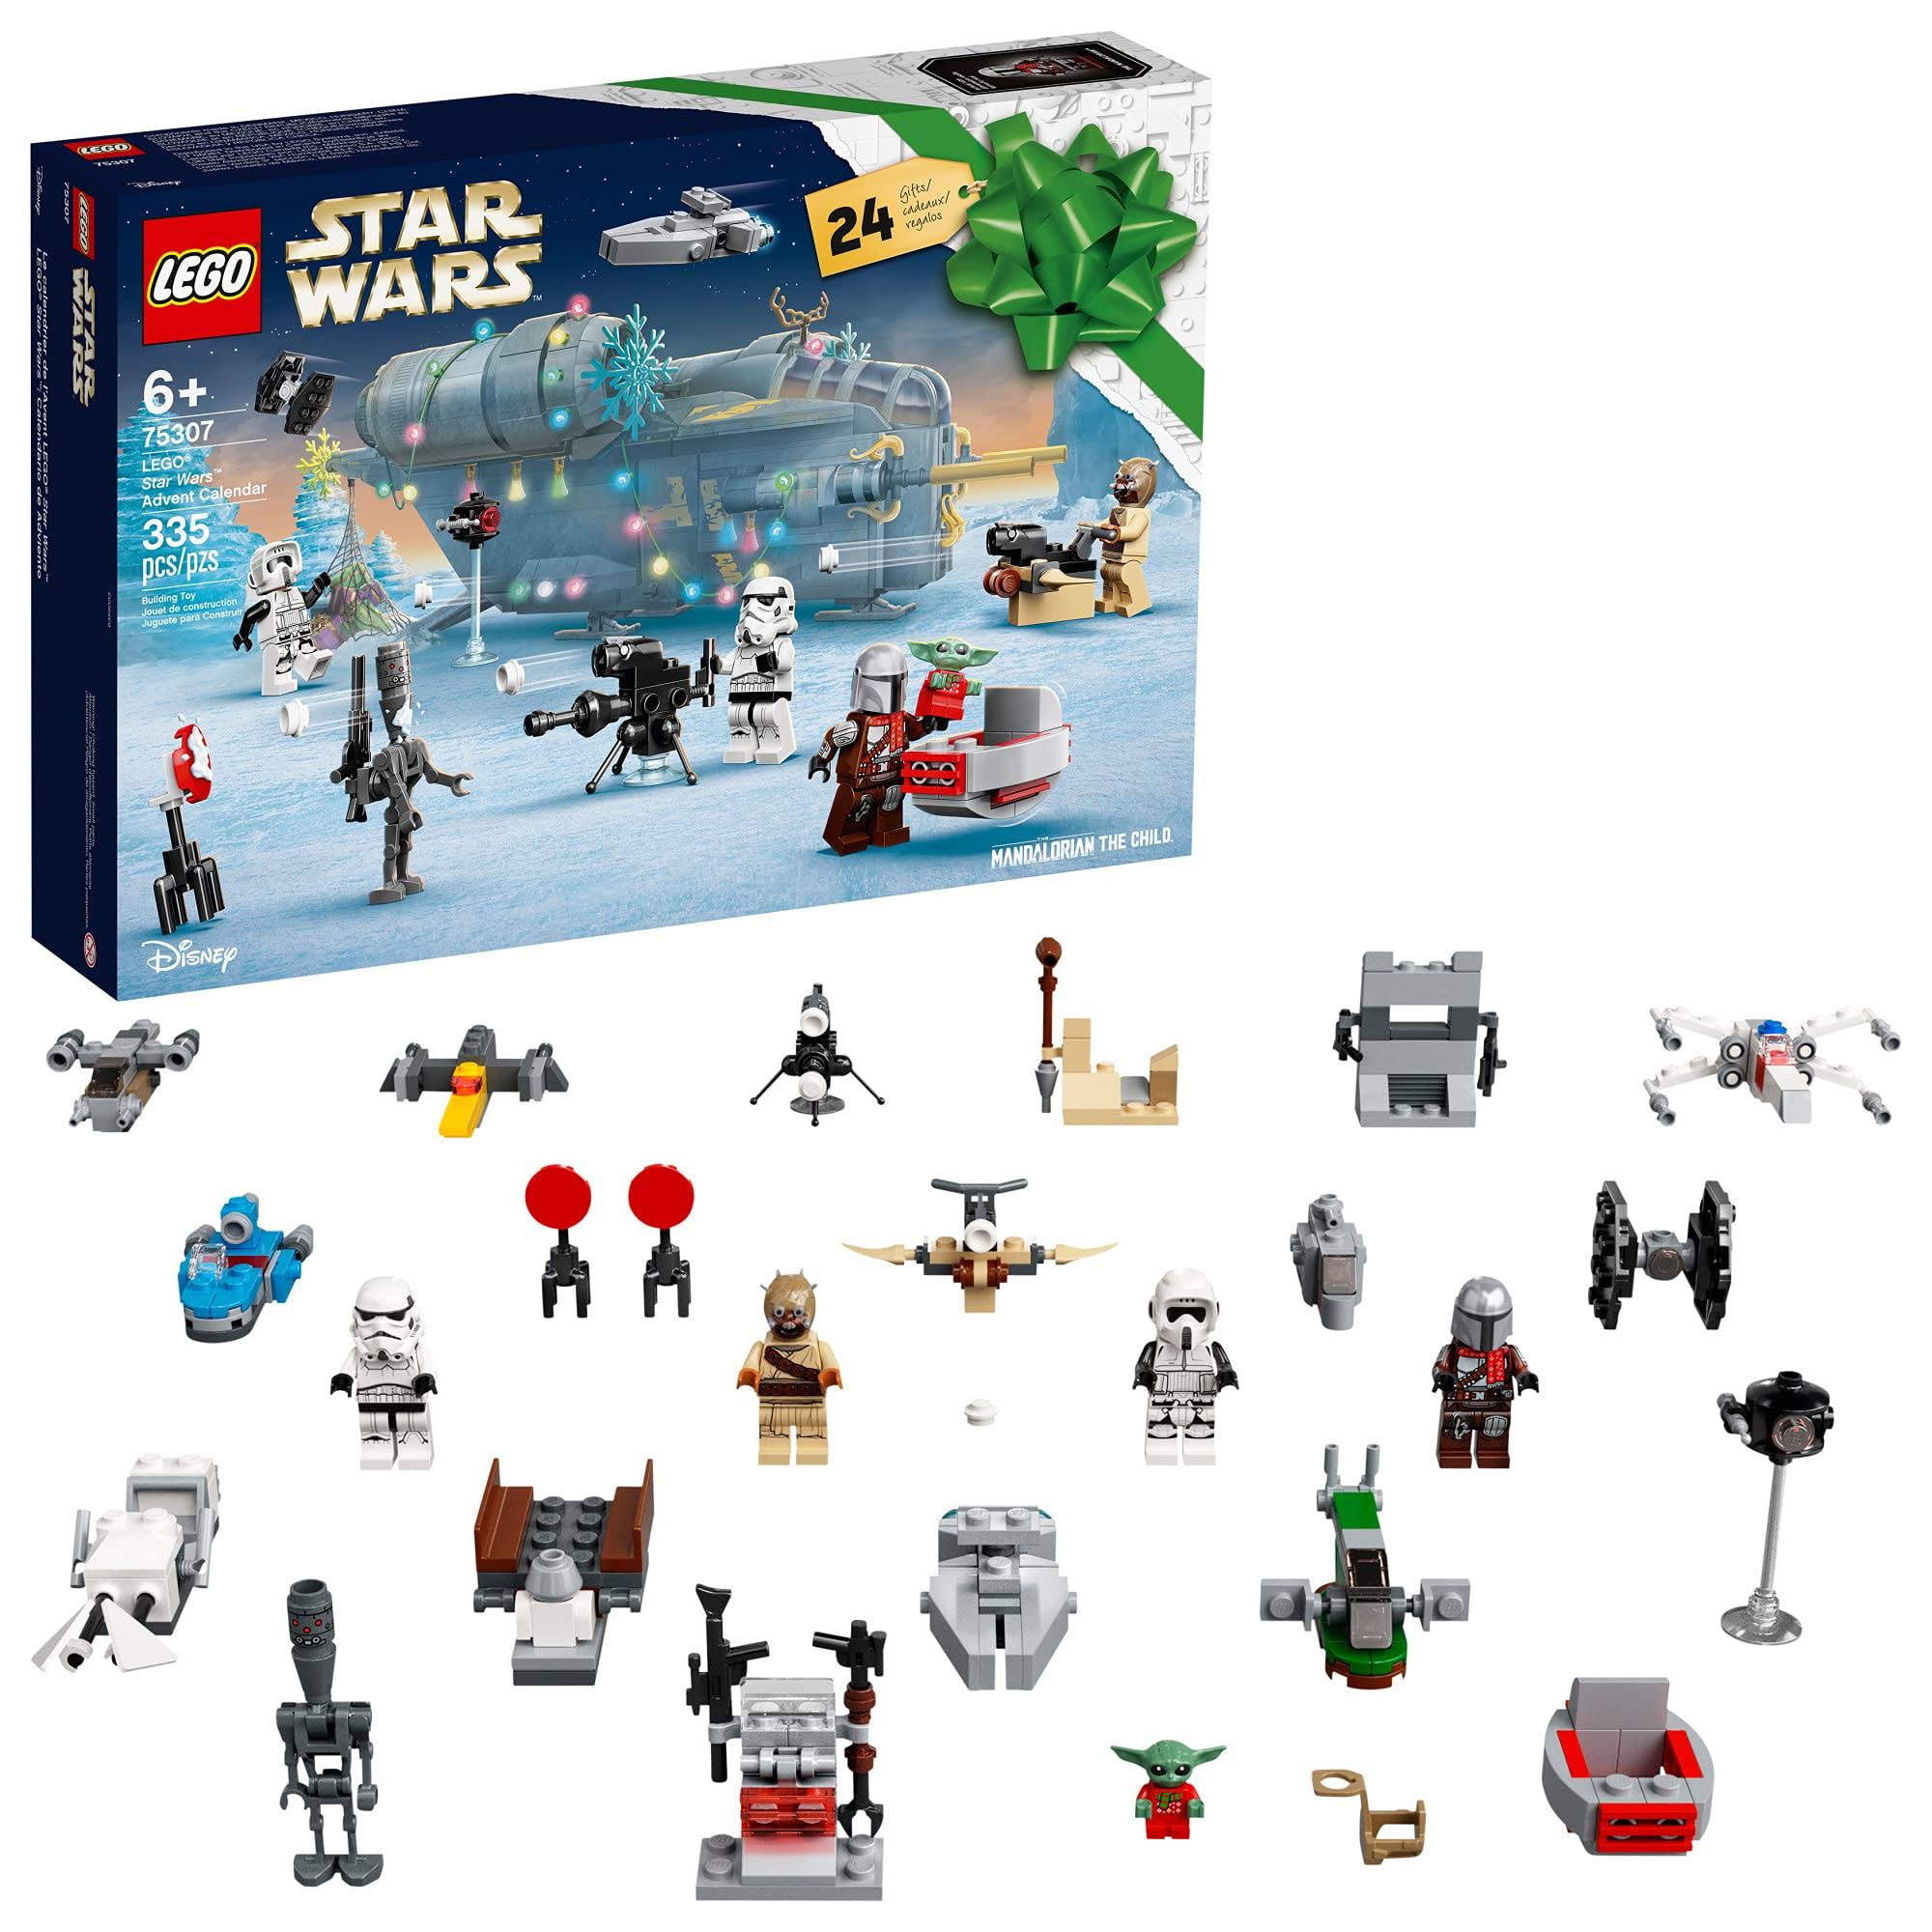 LEGO Star Wars Advent Calendar 75307 Awesome Toy Building Kit for Kids